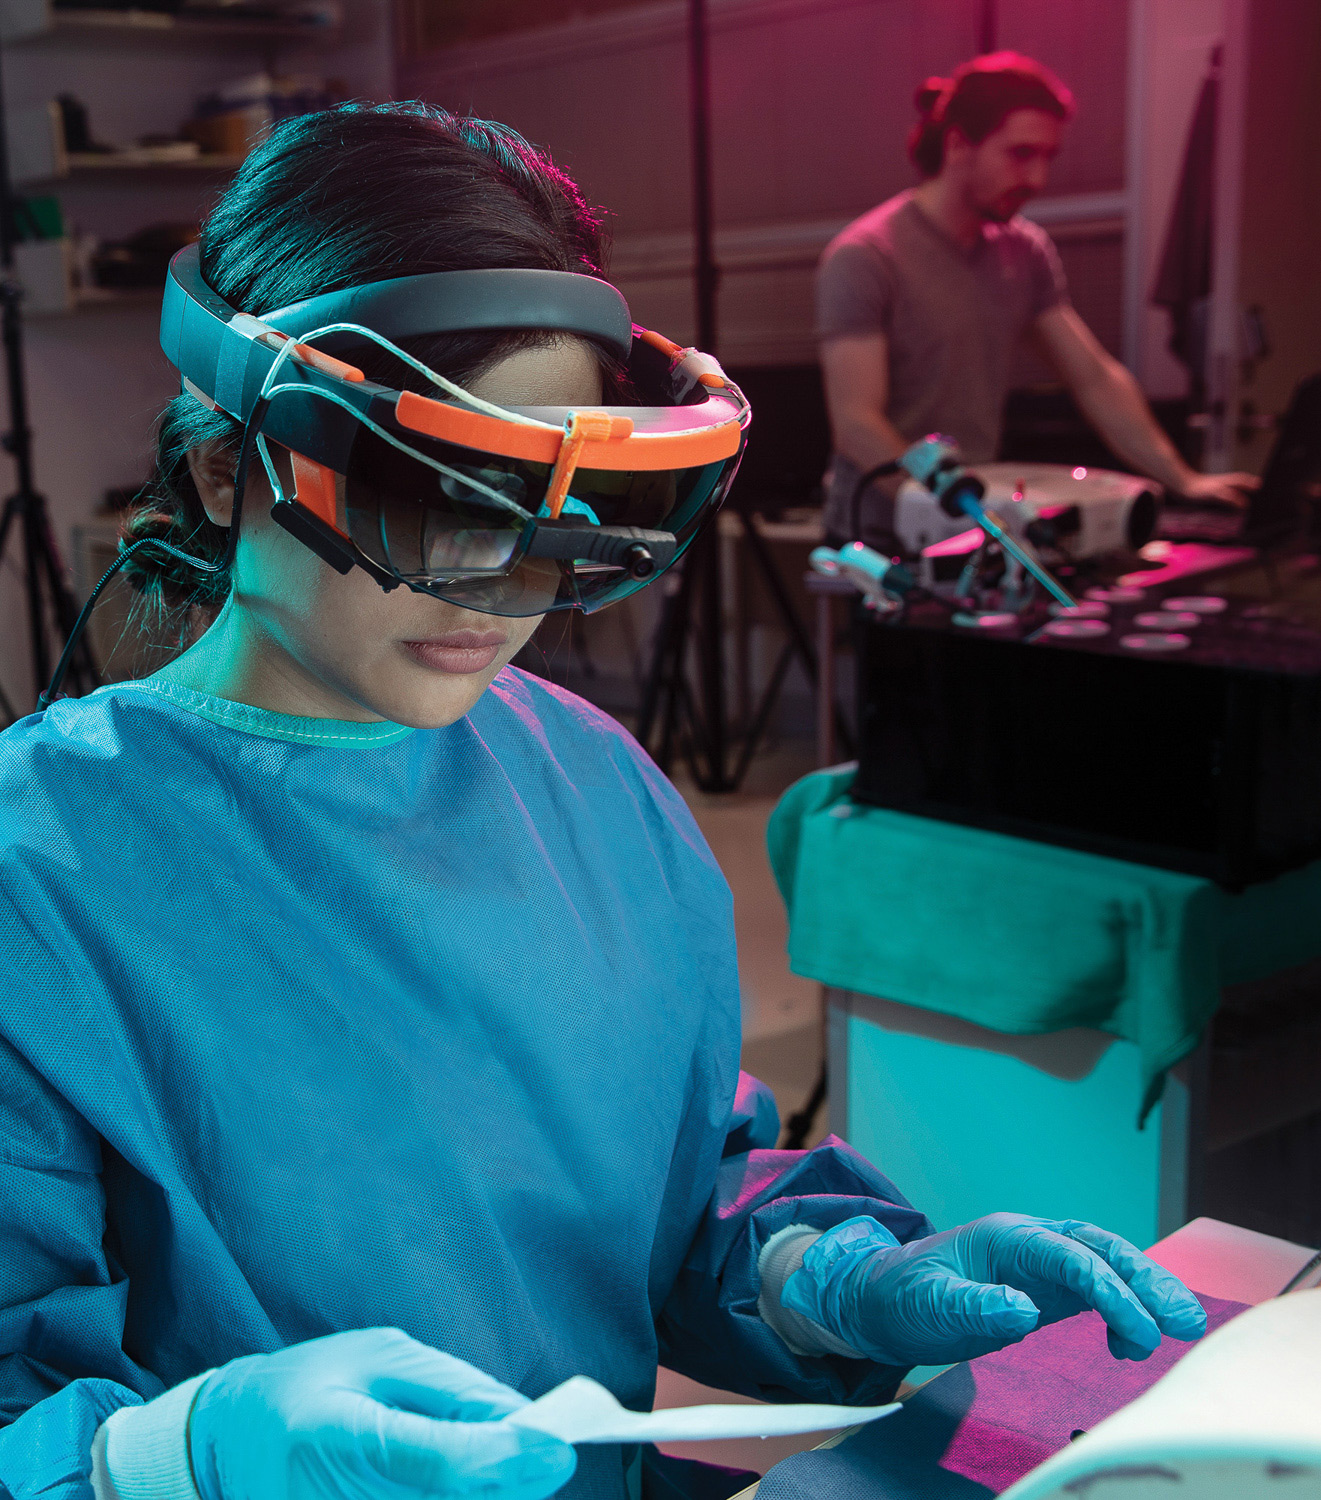 Poala Sanchez, graduate student in surgical education, wears an augmented reality HoloLens device that displays instructions for performing a surgical task. (photos by Laughing Dog)